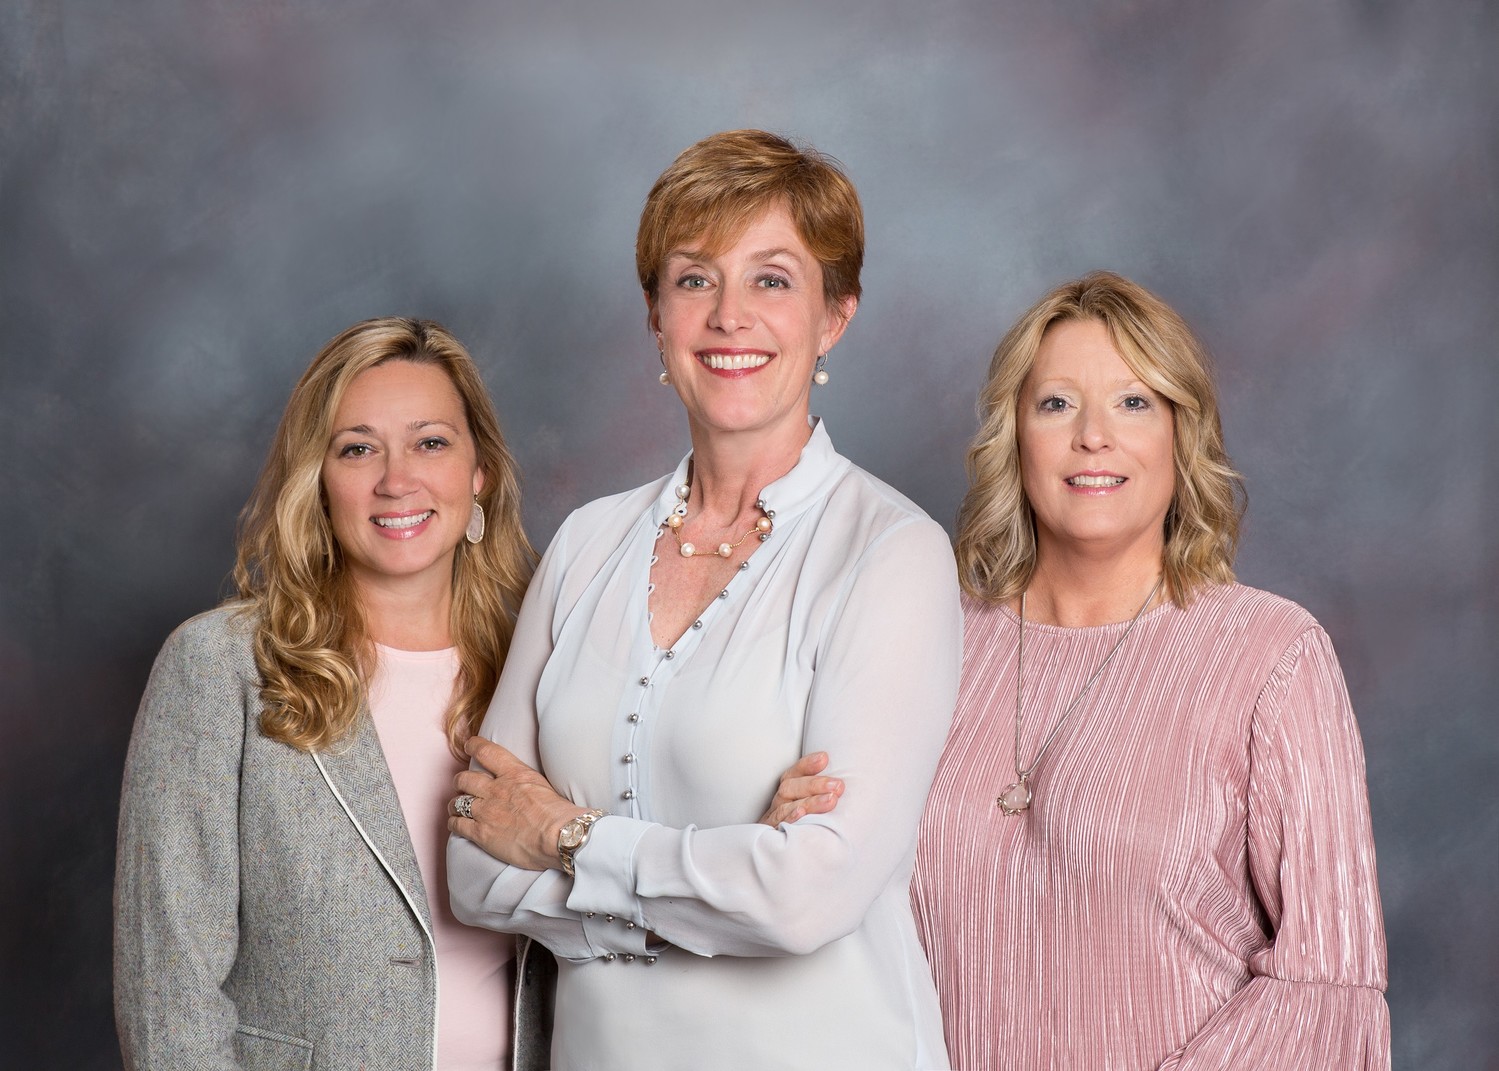 The Lisa Barton Team, of the Ponte Vedra office, was recognized as the Top Producing Team.